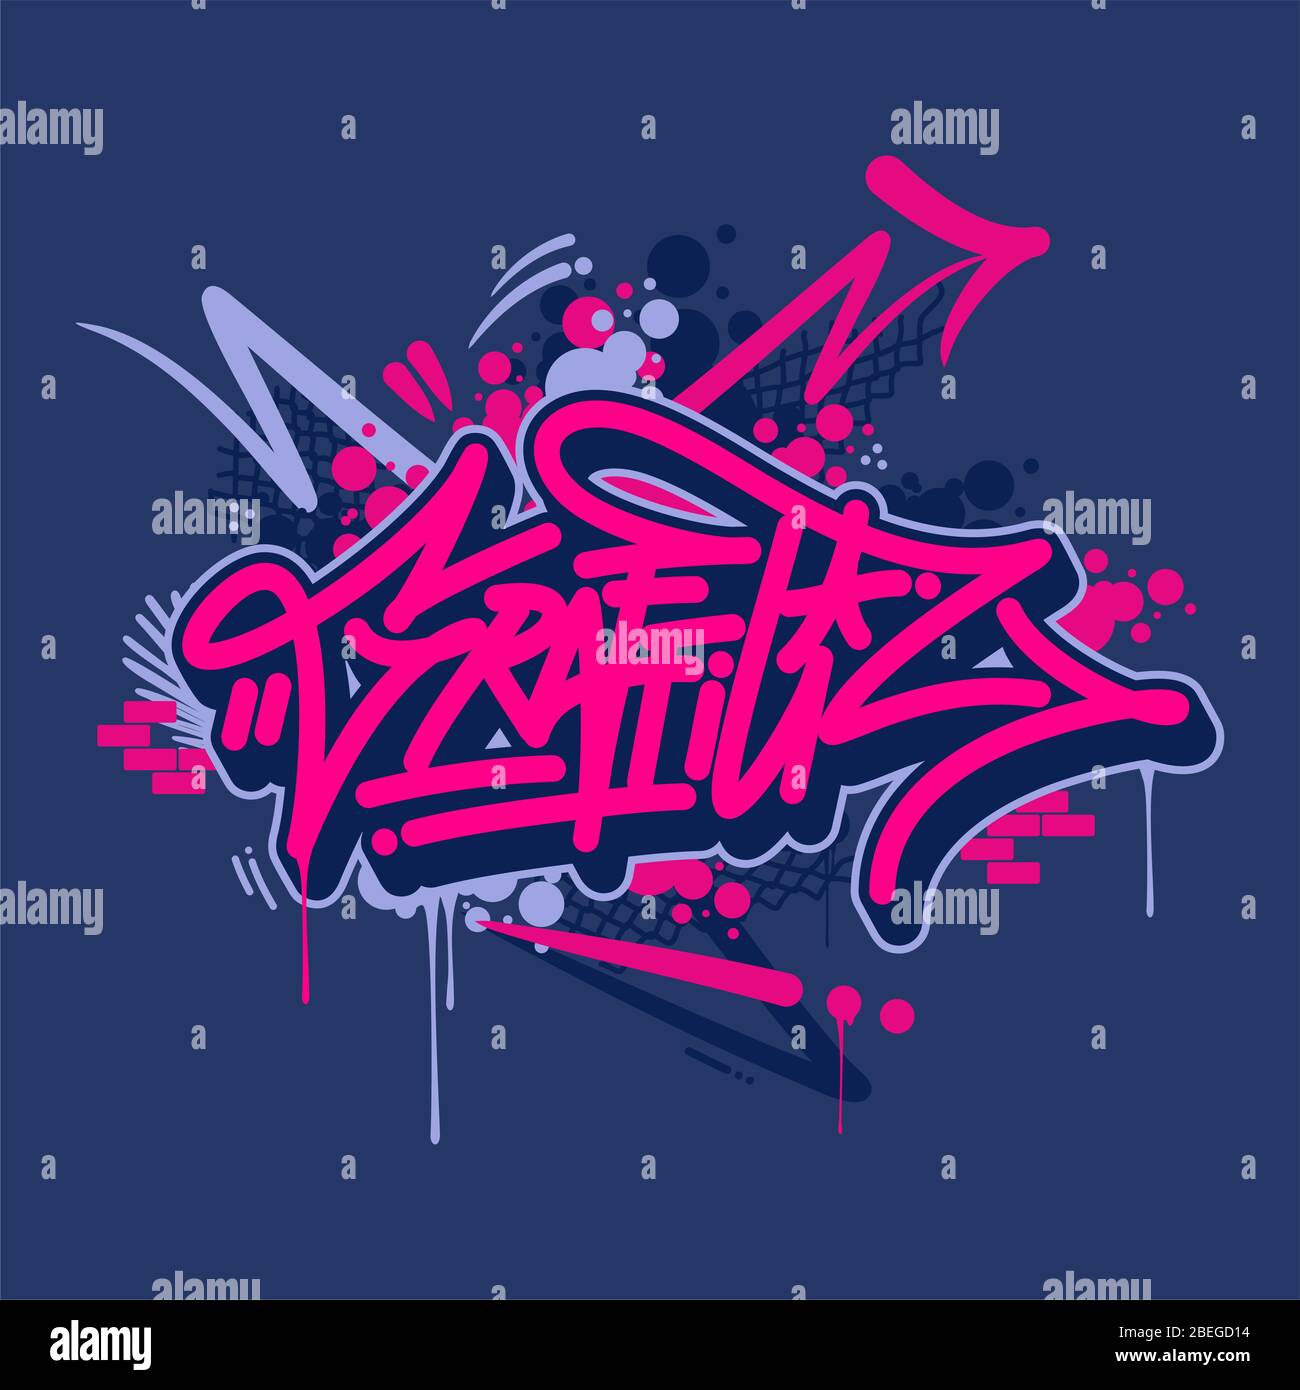 Graffiti Font Lettering With A Dark Blue Background Stock Vector